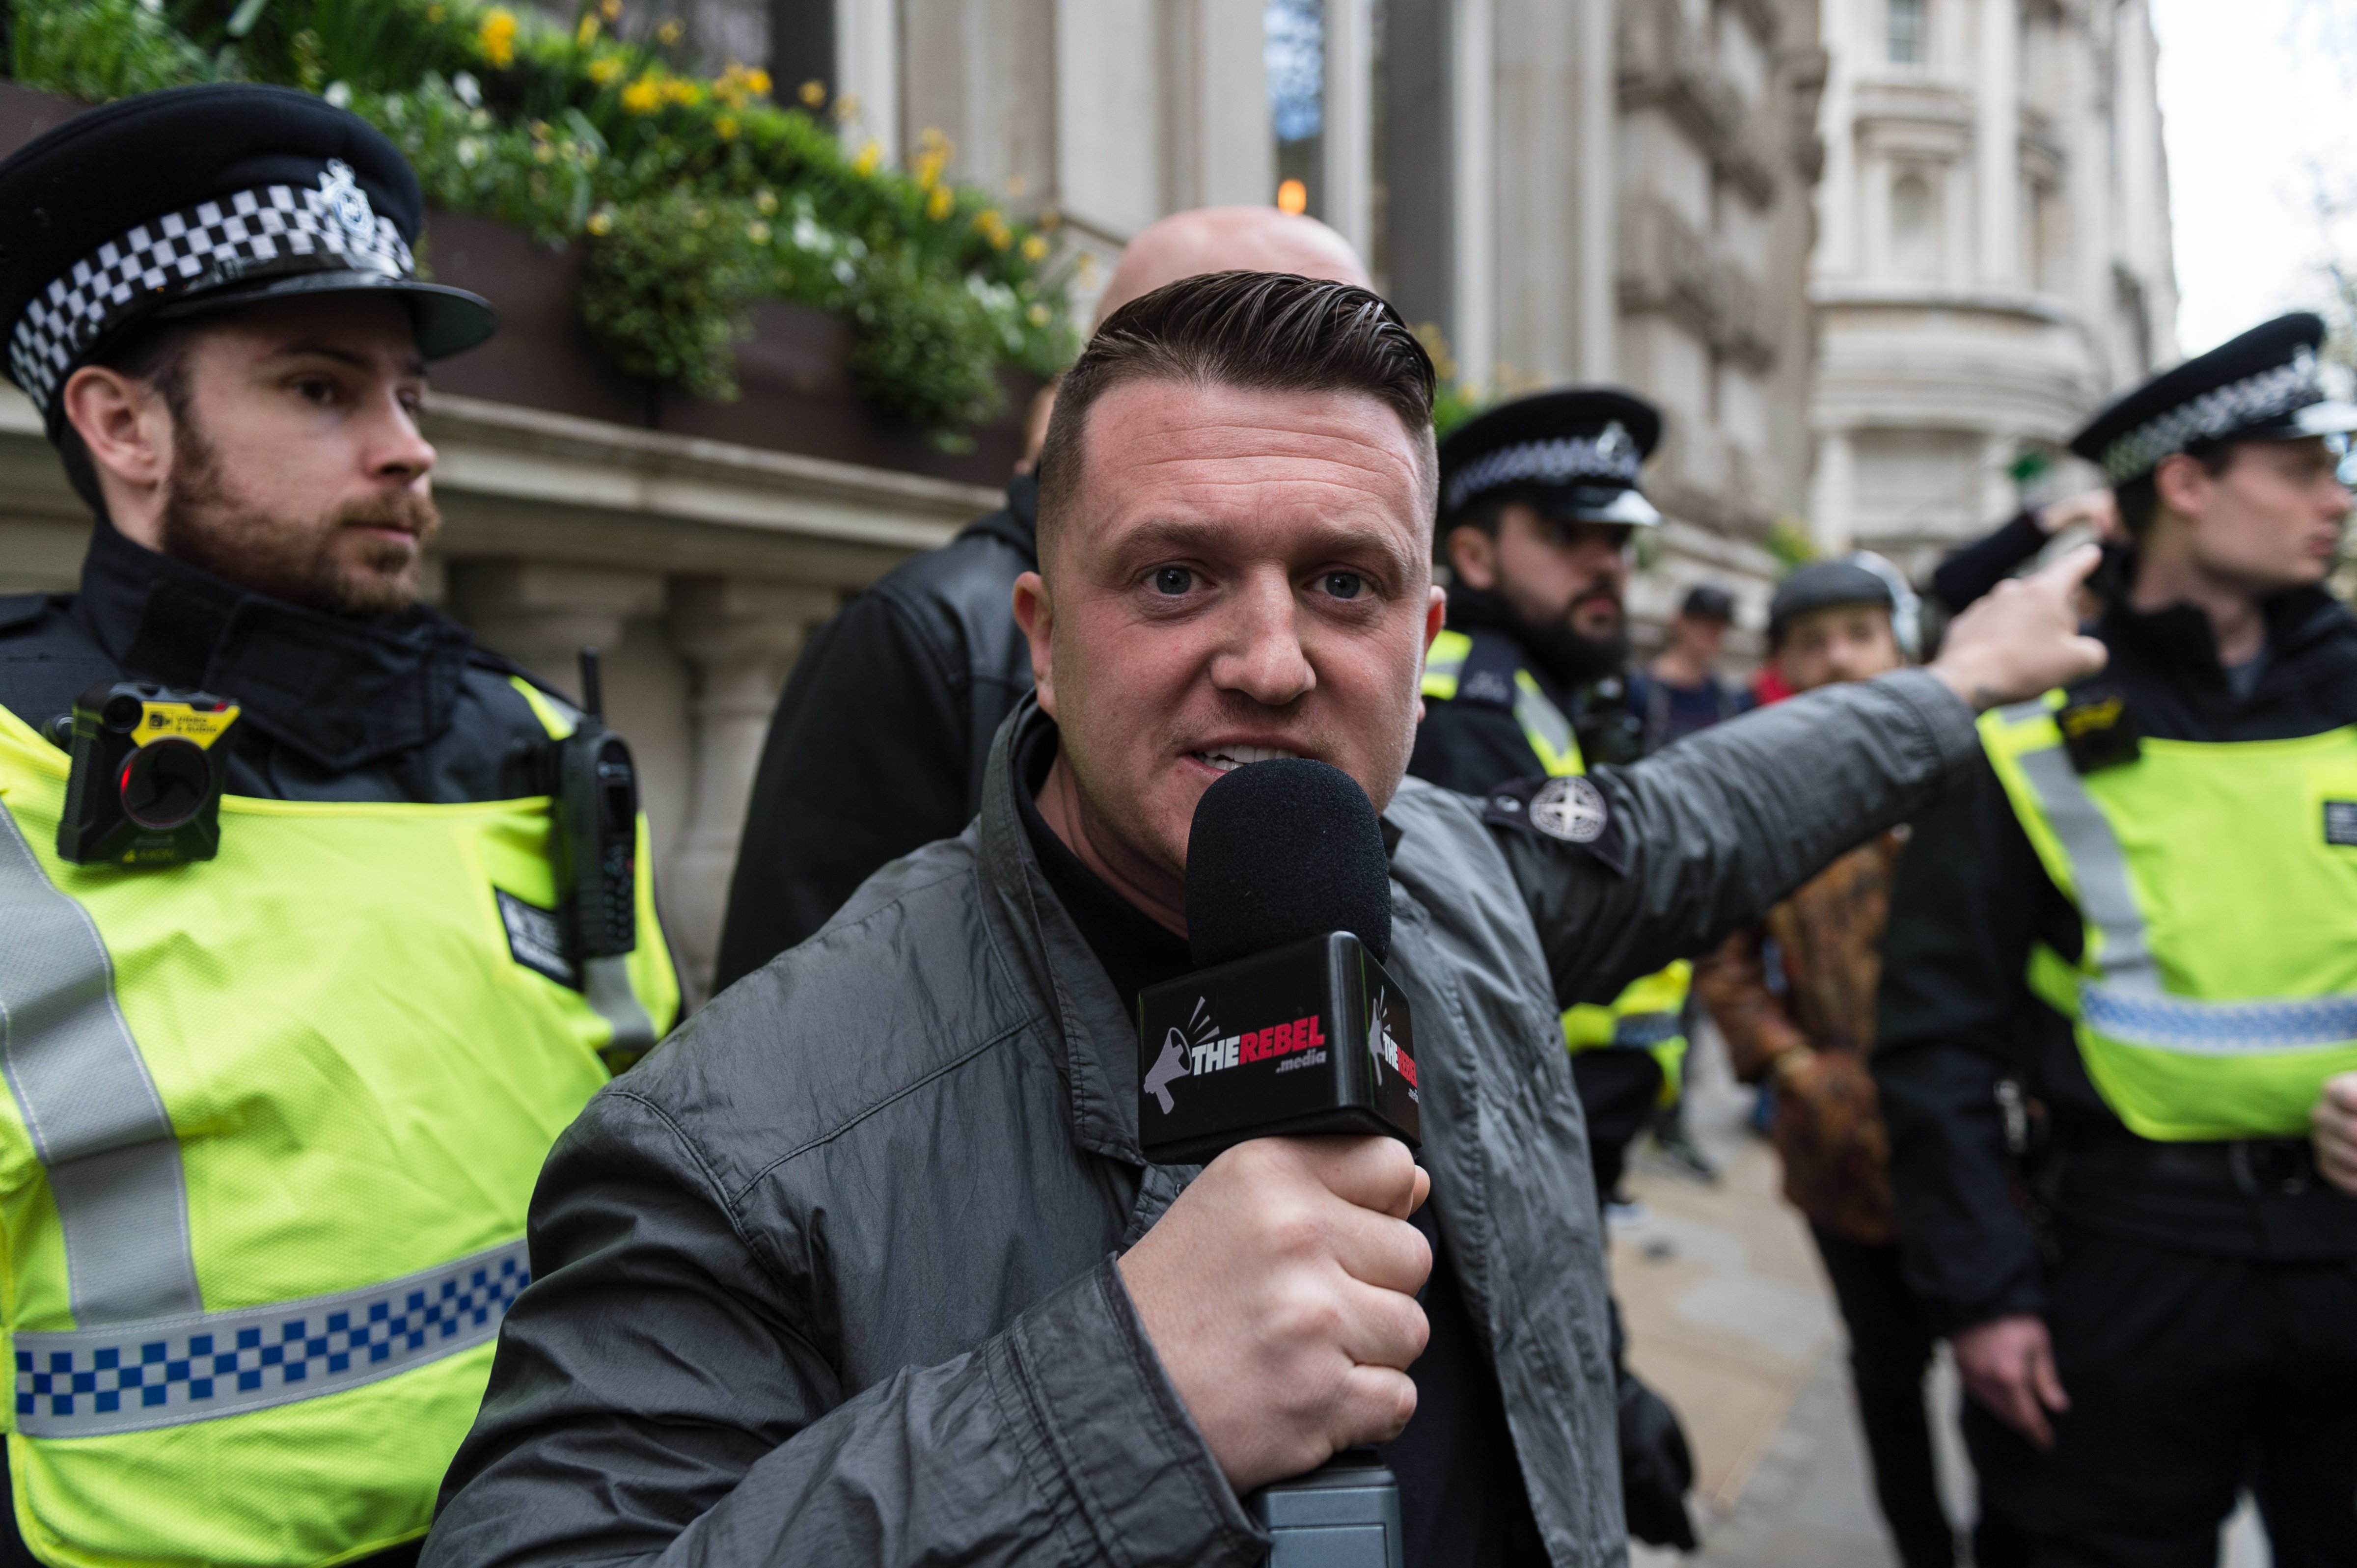 Tommy Robinson, former leader of the English Defence League is escorted by the police as supporters of far-right and anti-Islamic English Defence League (EDL) gather in central London to protest against Islam in the wake of the Westminster terror attack, on April 01, 2017 in London, England. (Barcroft Media—Barcroft Media via Getty Images)